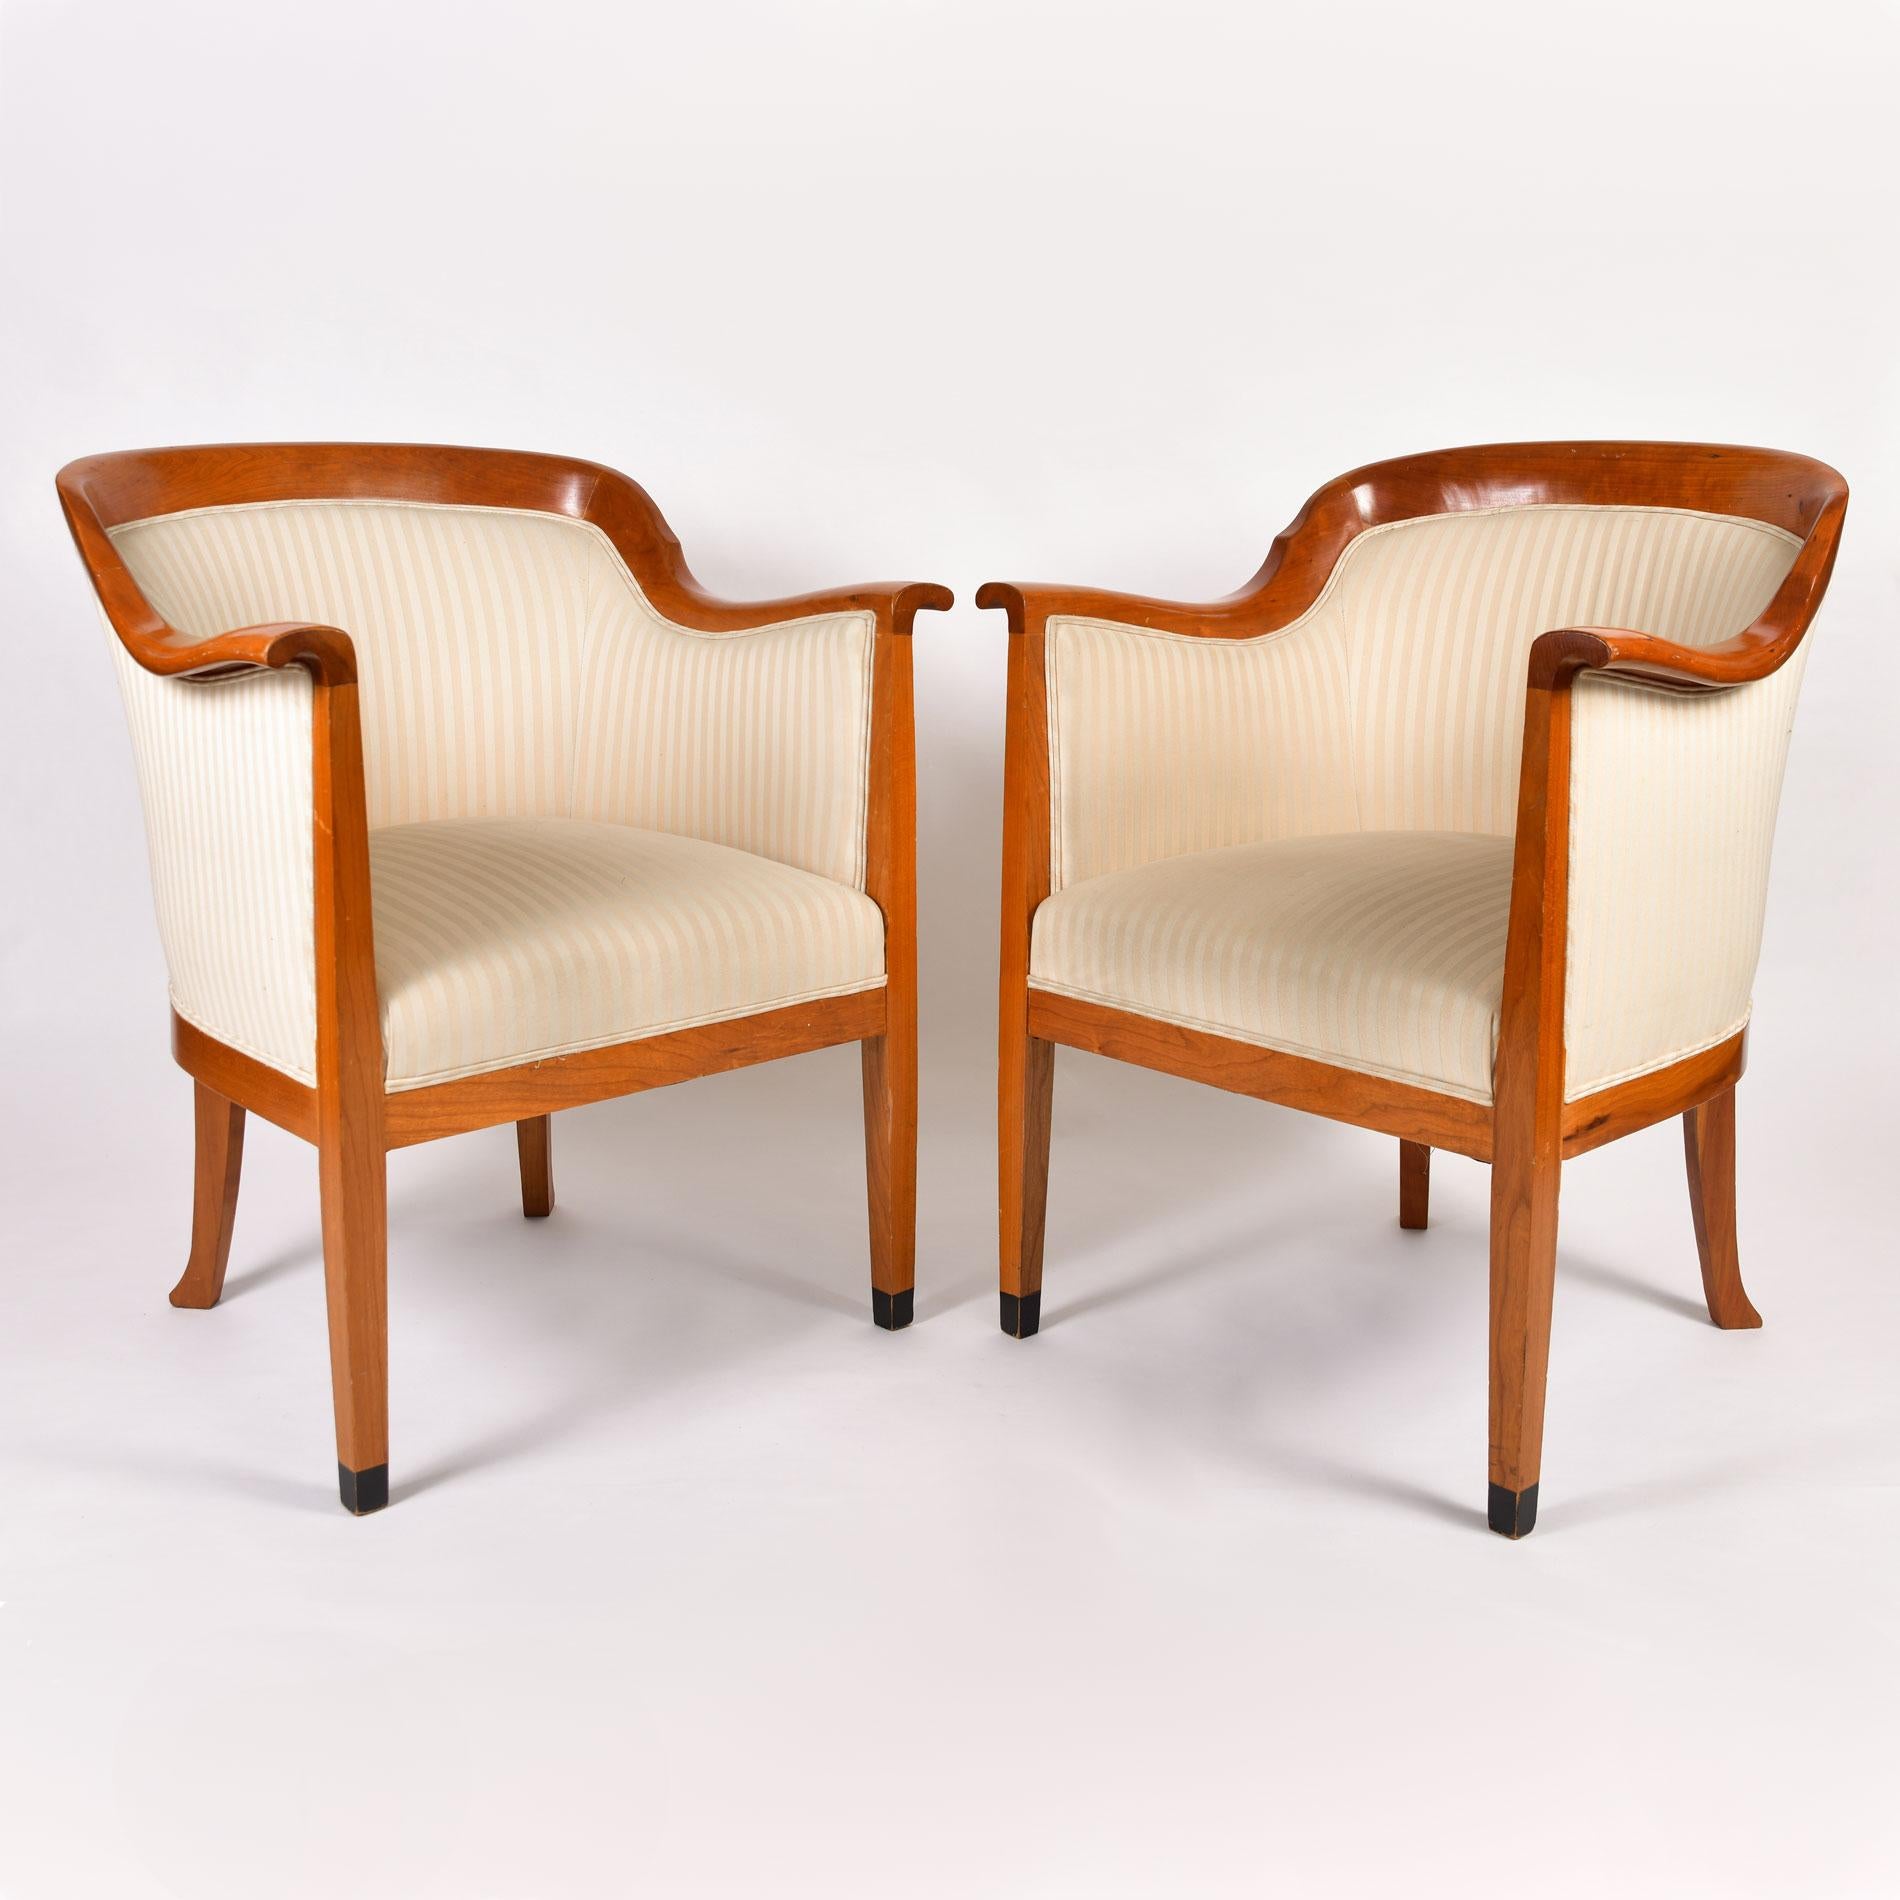 Generous and comfortable pair of occasional chairs with cherrywood tapered legs and frame. Black painted front feet. Upholstered in substantial cream striped fabric on all sides with double piping detail throughout.
Please note the fabric is scuffed